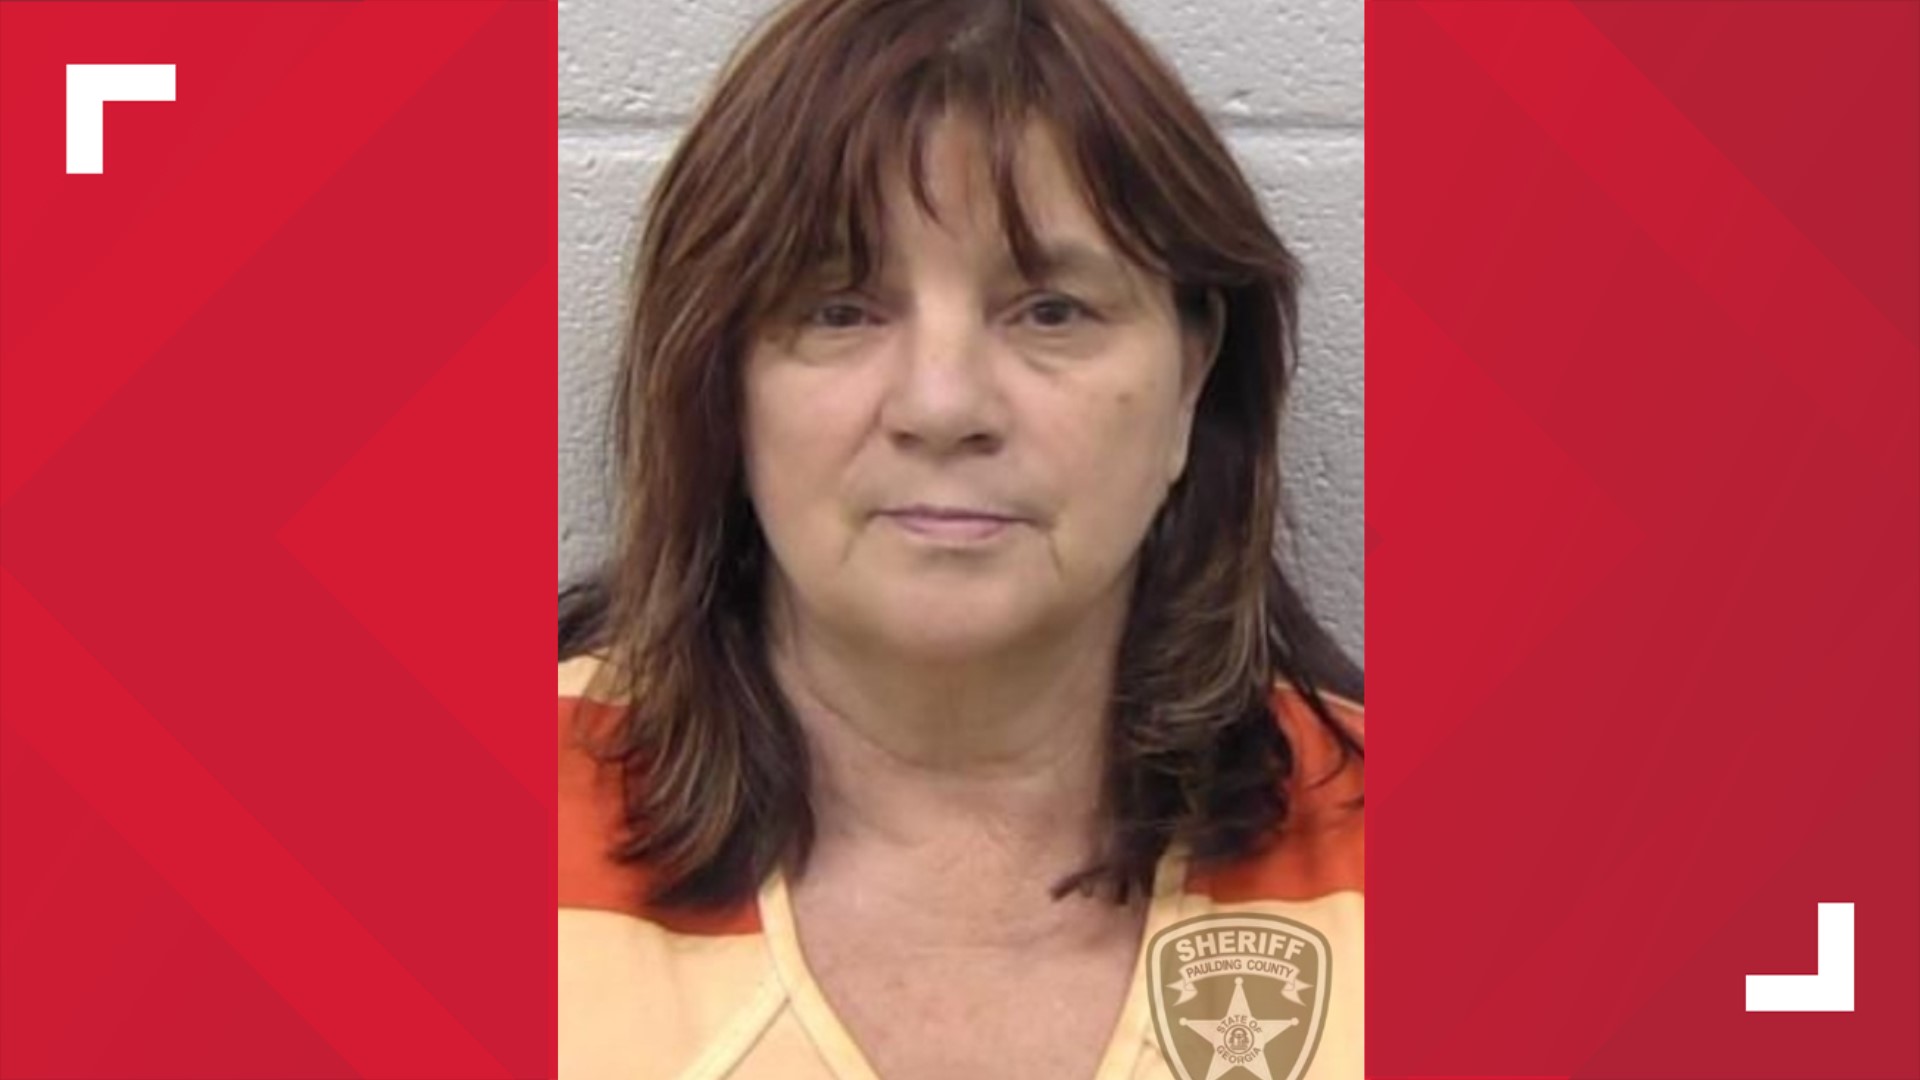 Goldie Lipsky was arrested in January on similar charges.